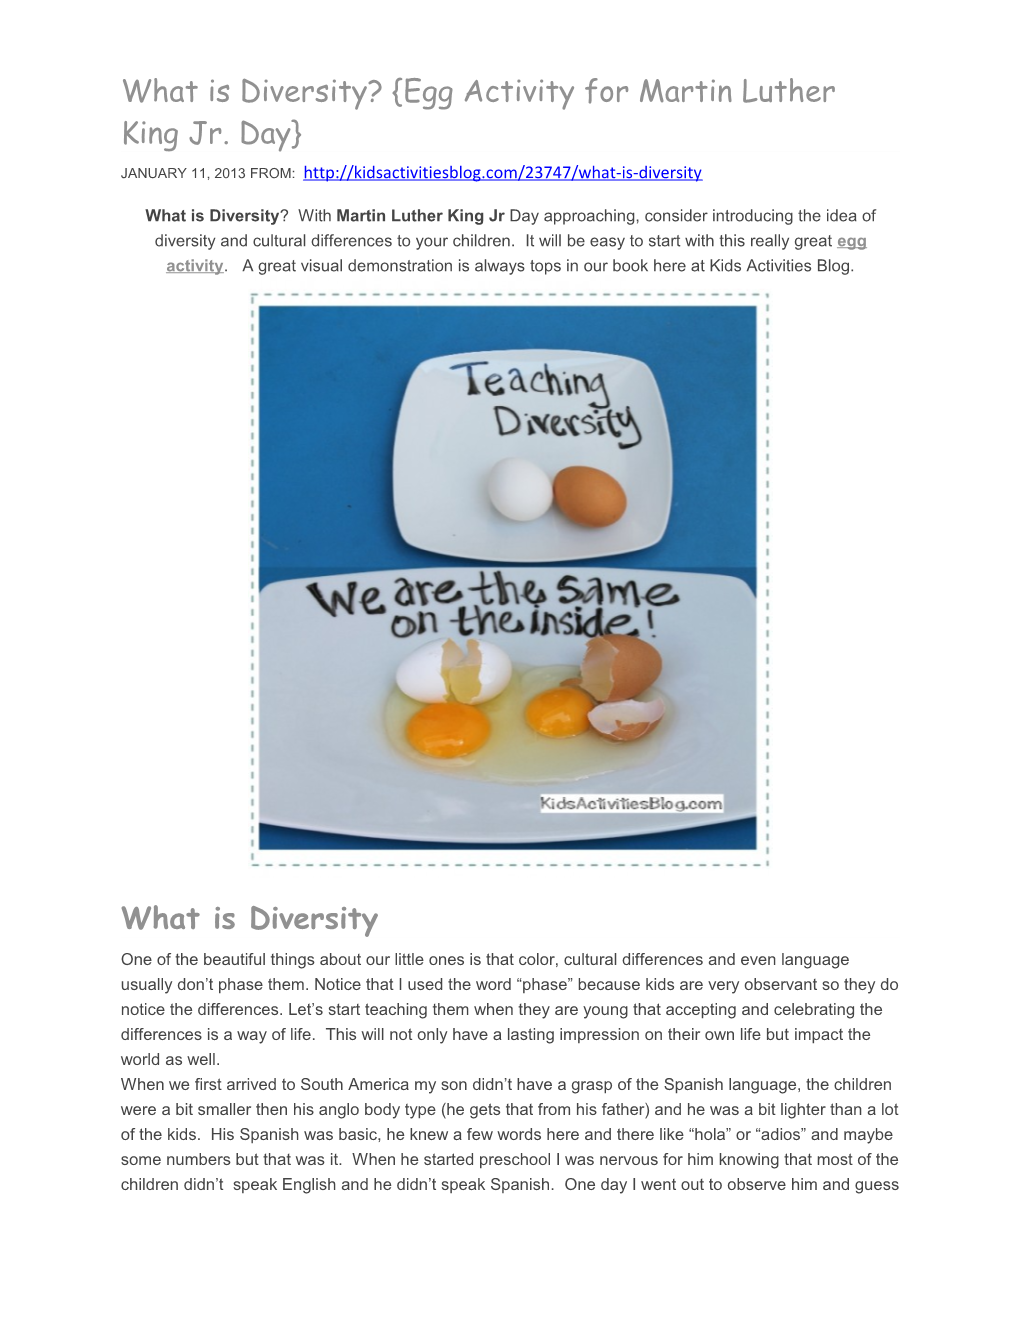 What Is Diversity? Egg Activity for Martin Luther King Jr. Day